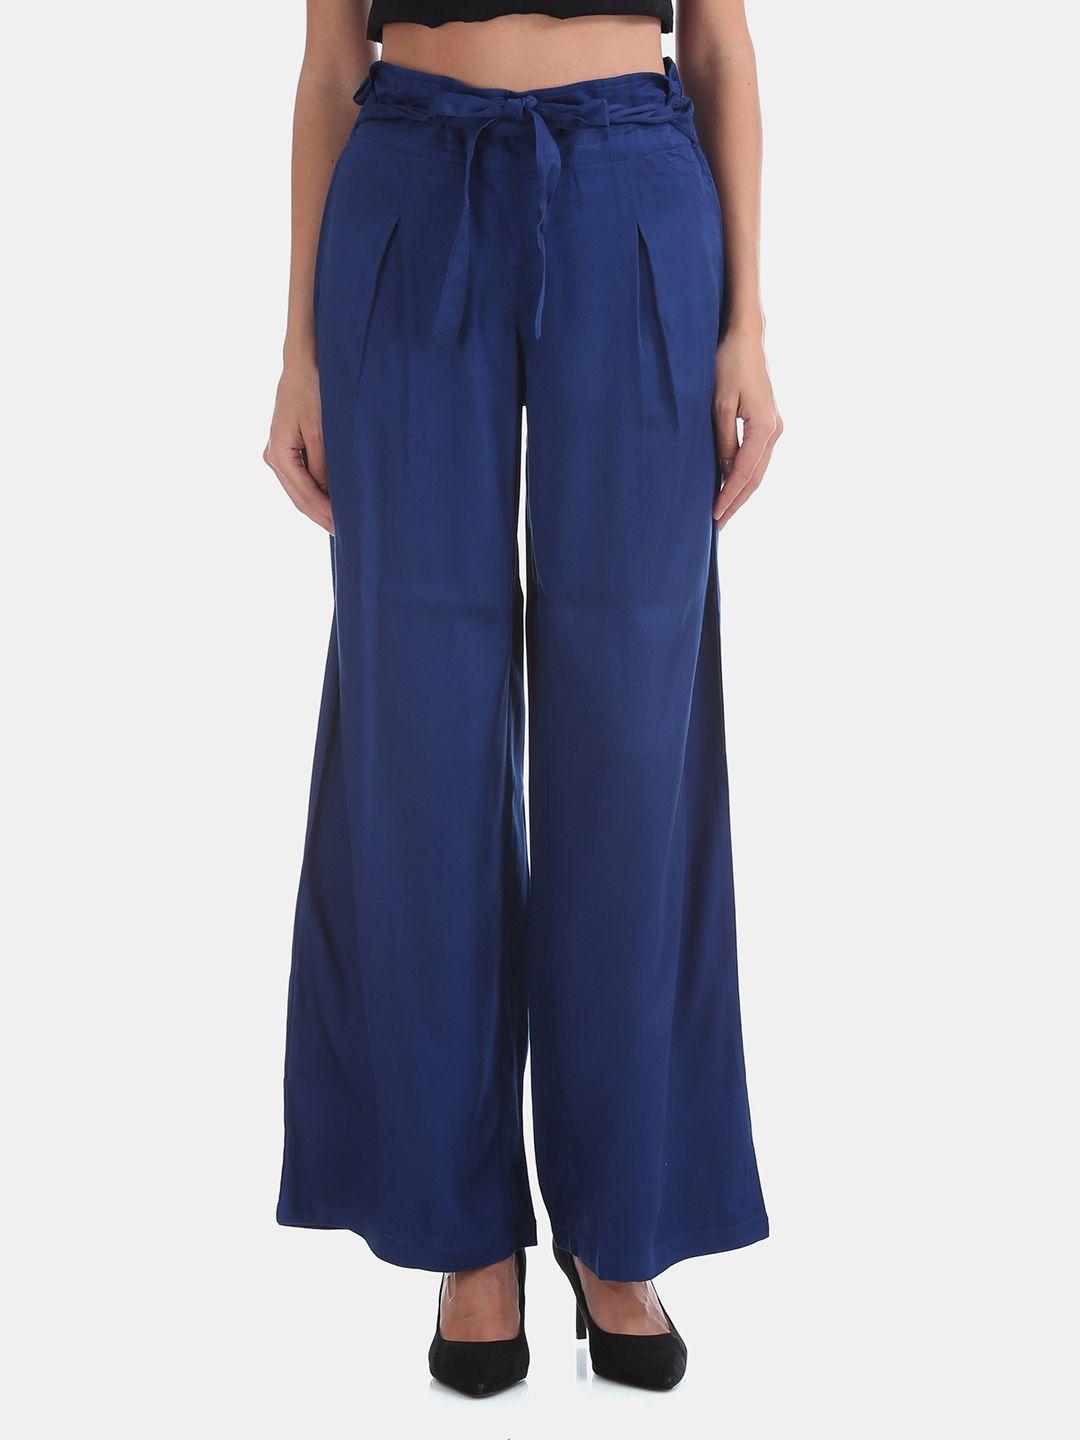 u.s. polo assn. women blue flared solid parallel trousers